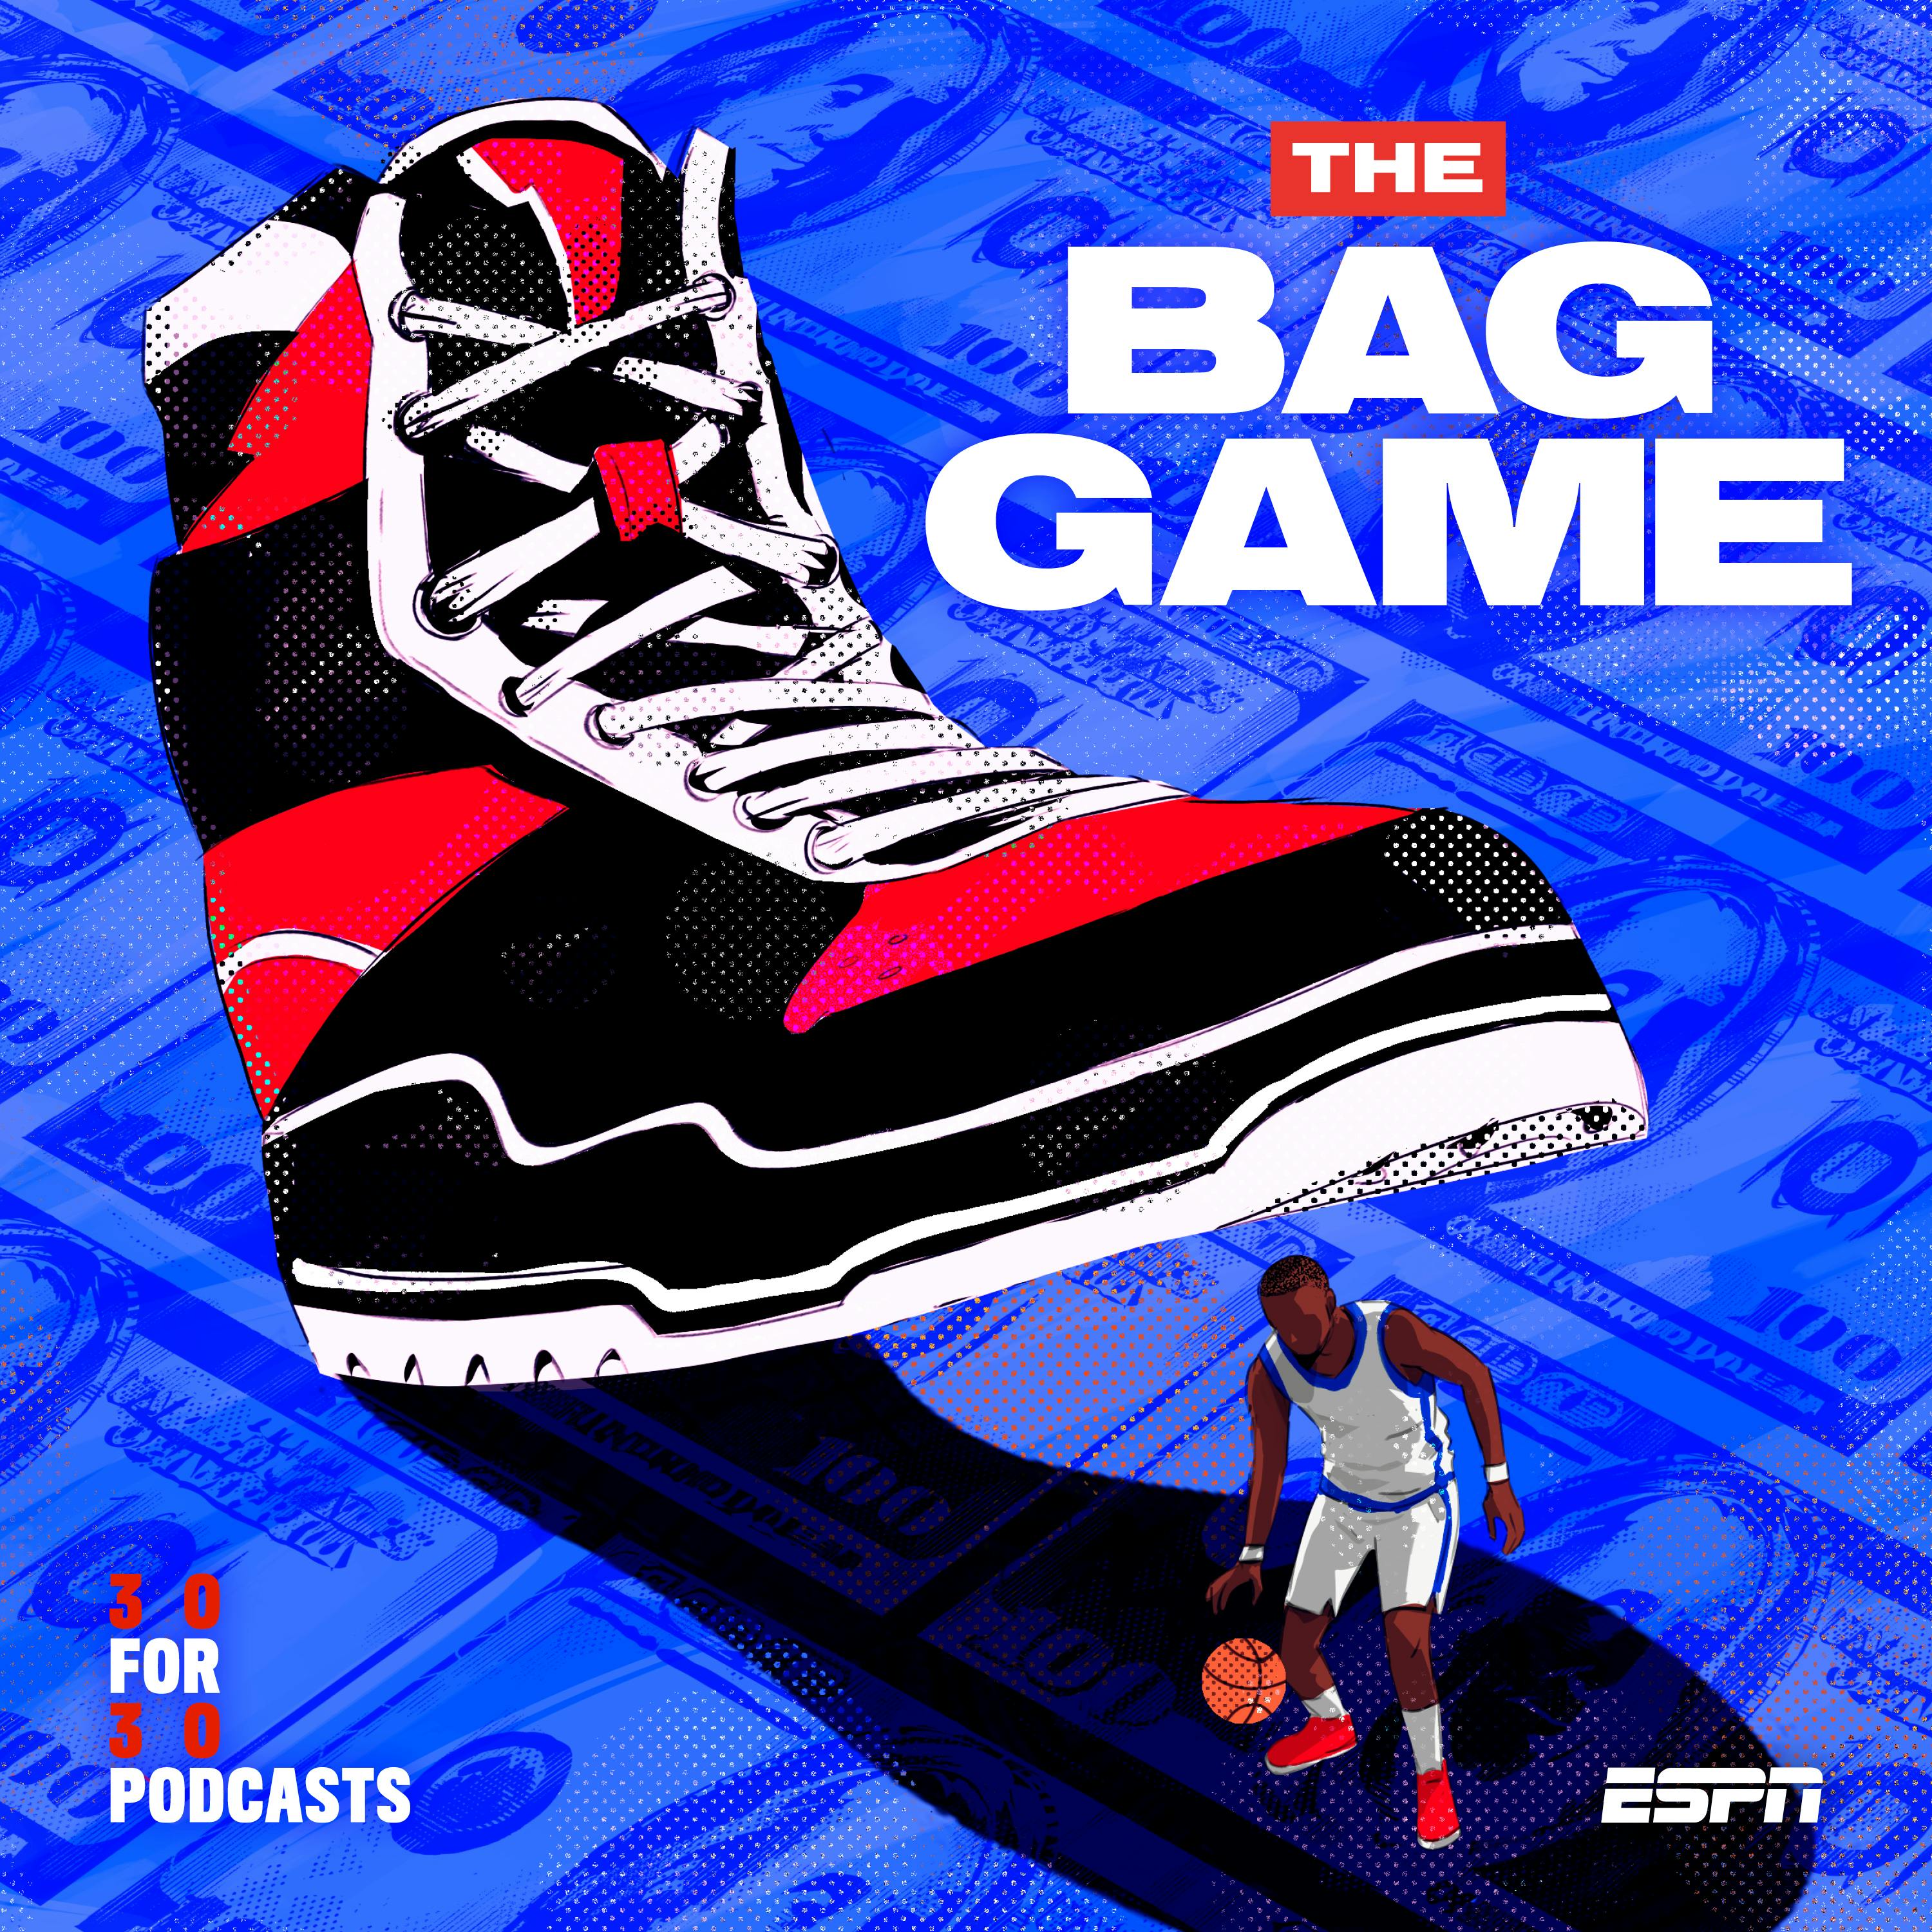 TRAILER: THE BAG GAME